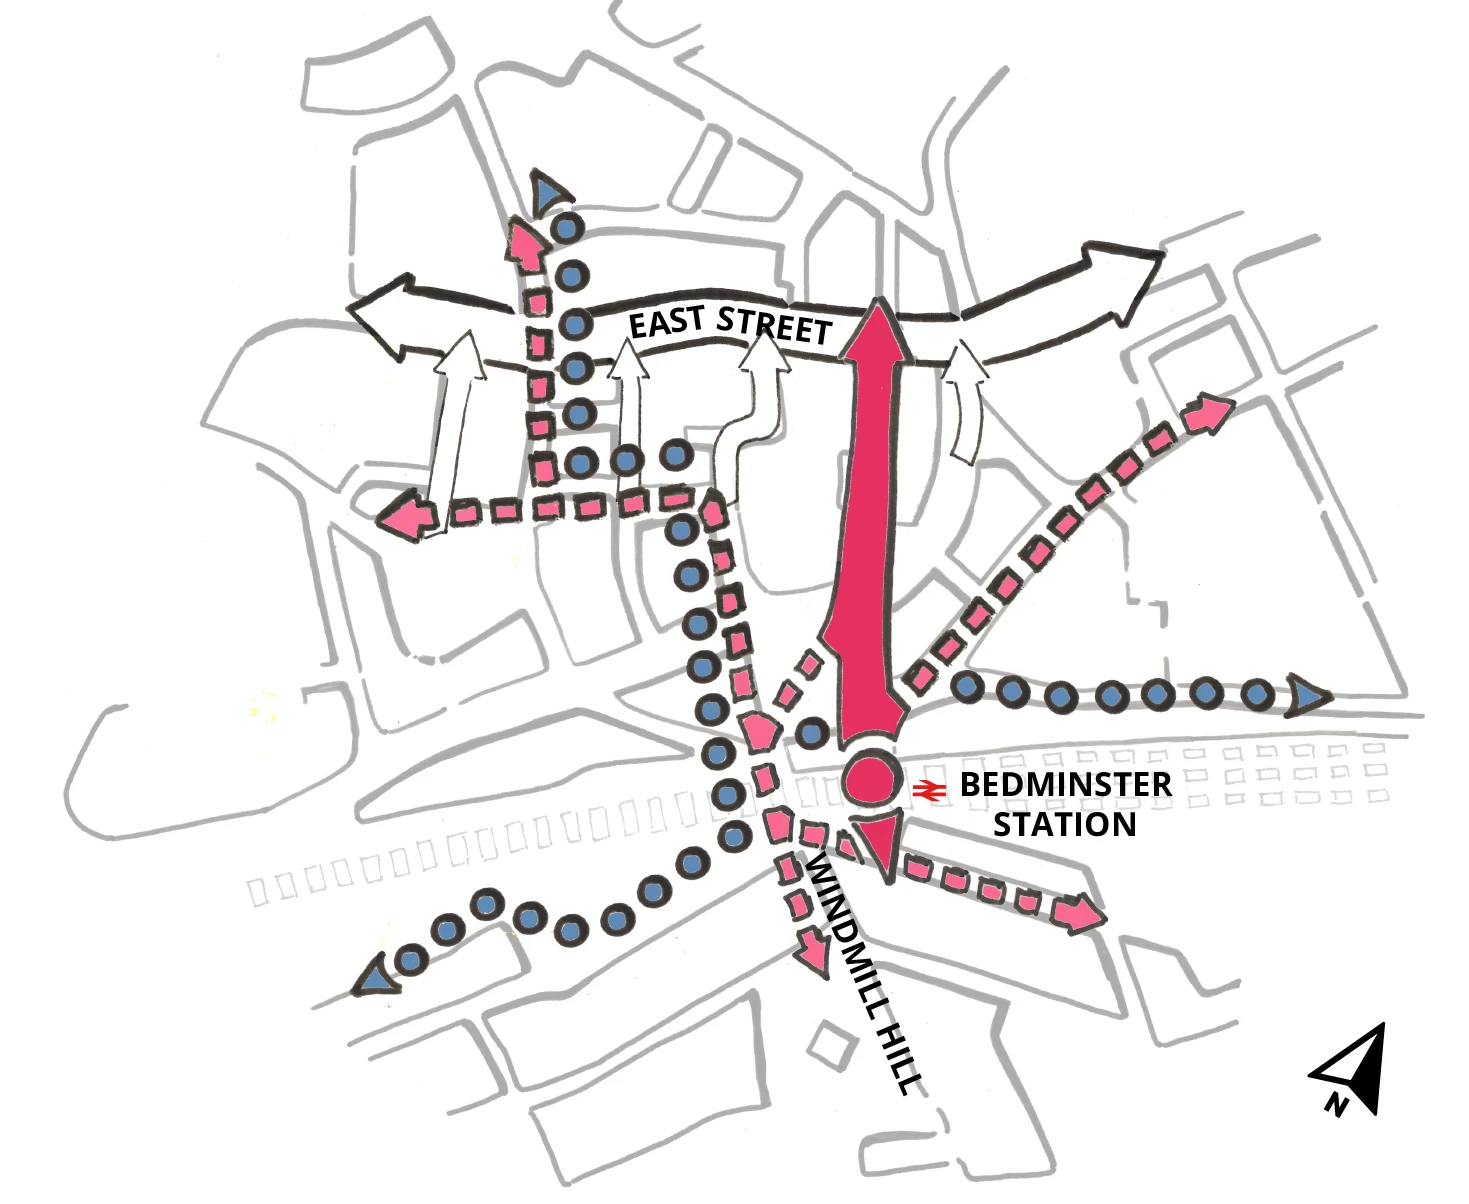 The base of this diagram, which is the same for all the framework diagrams, is a hand drawing showing the urban blocks of the wider Bedminster Green area – East Street is towards the top of the image, Dalby Avenue is in the middle, the railway and Bedminster station is below that and Windmill Hill is at the bottom. A large pink arrow runs north south from Bedminster station to East Street. Smaller dashed pink arrows and blue dotted arrows run along smaller streets.